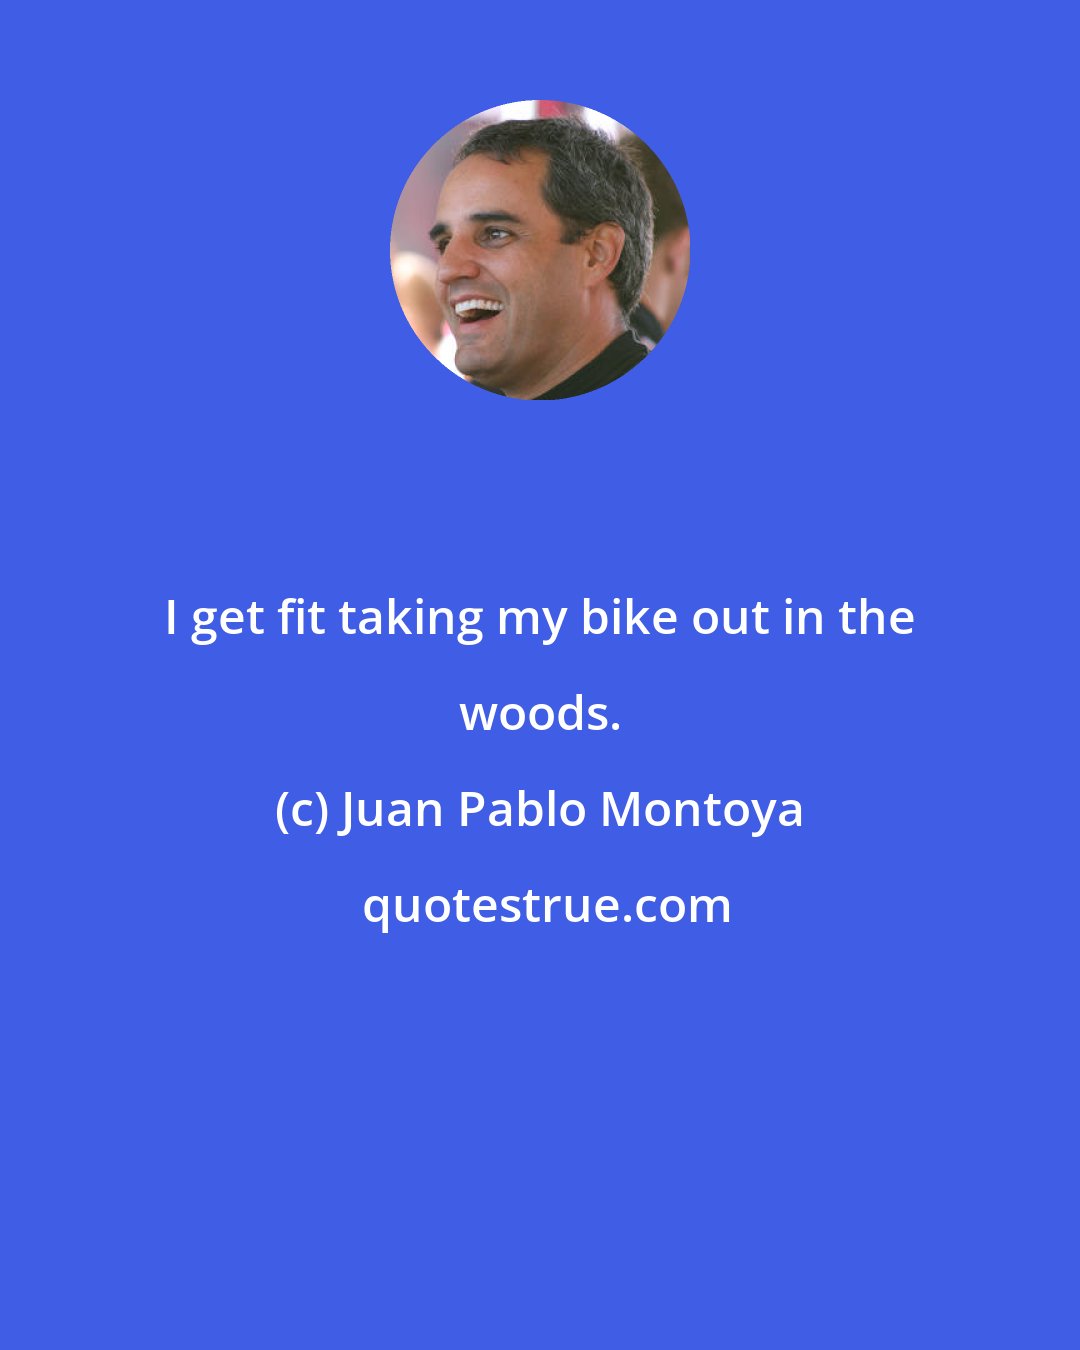 Juan Pablo Montoya: I get fit taking my bike out in the woods.